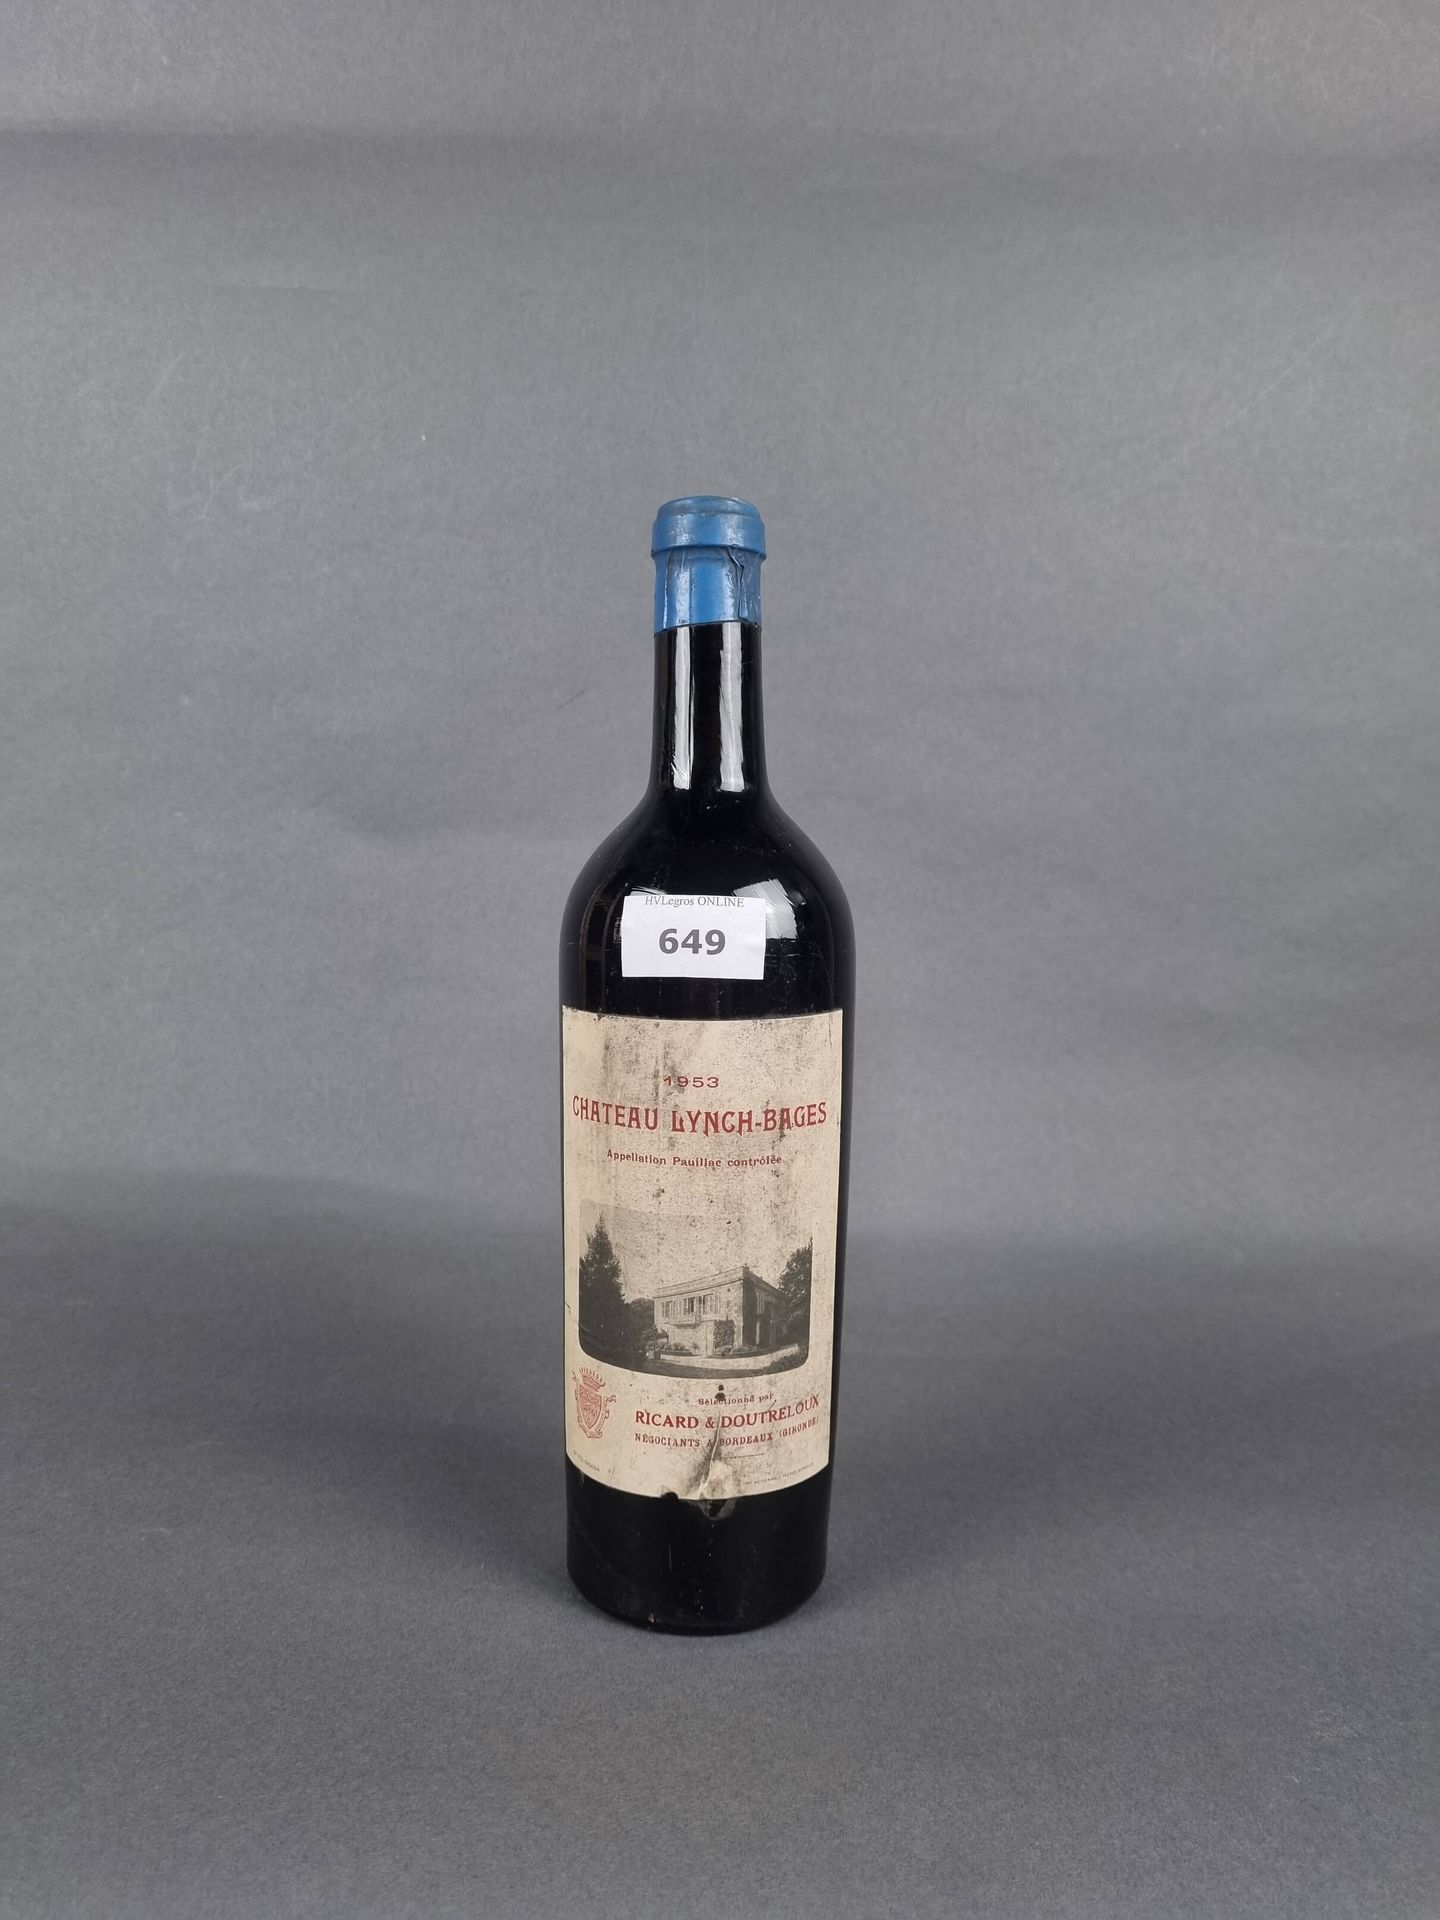 Null 1 bottle of Château Lynch-Bages 1953